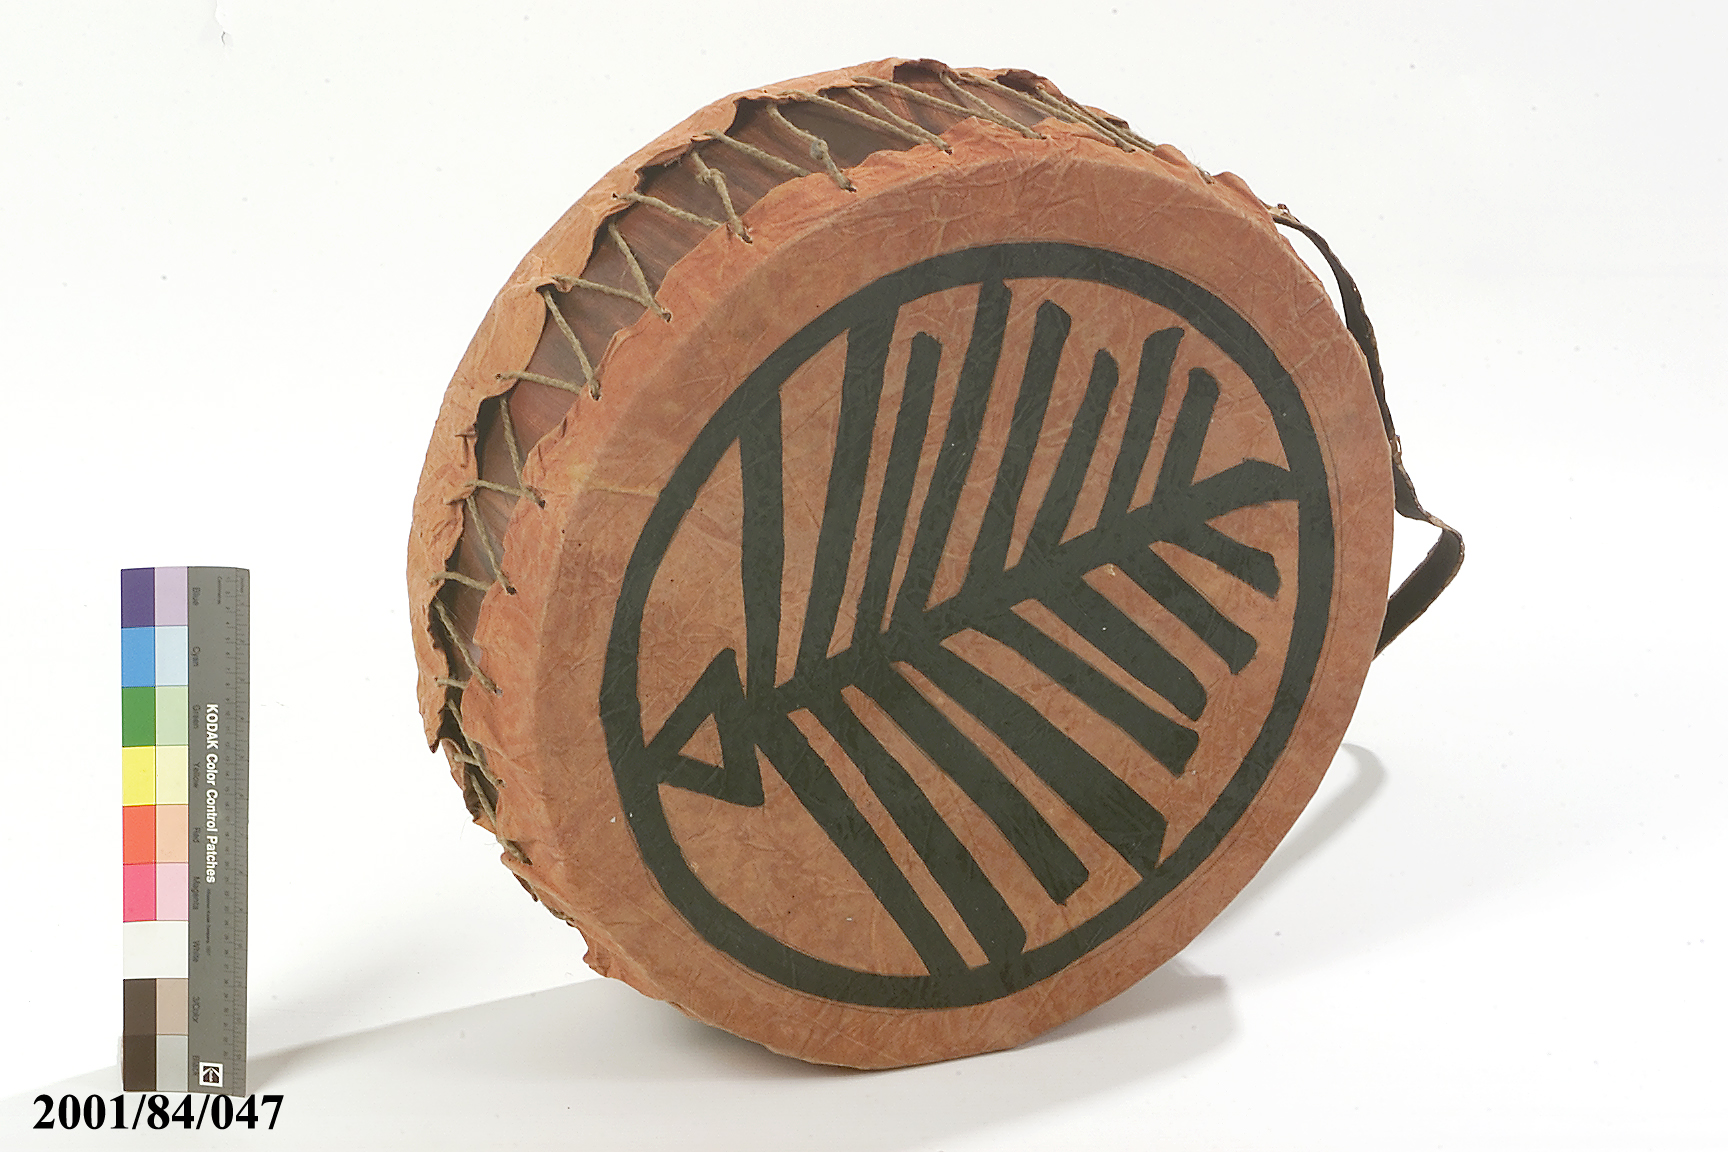 African drum performance prop used in the Sydney Olympic Games Opening Ceremony